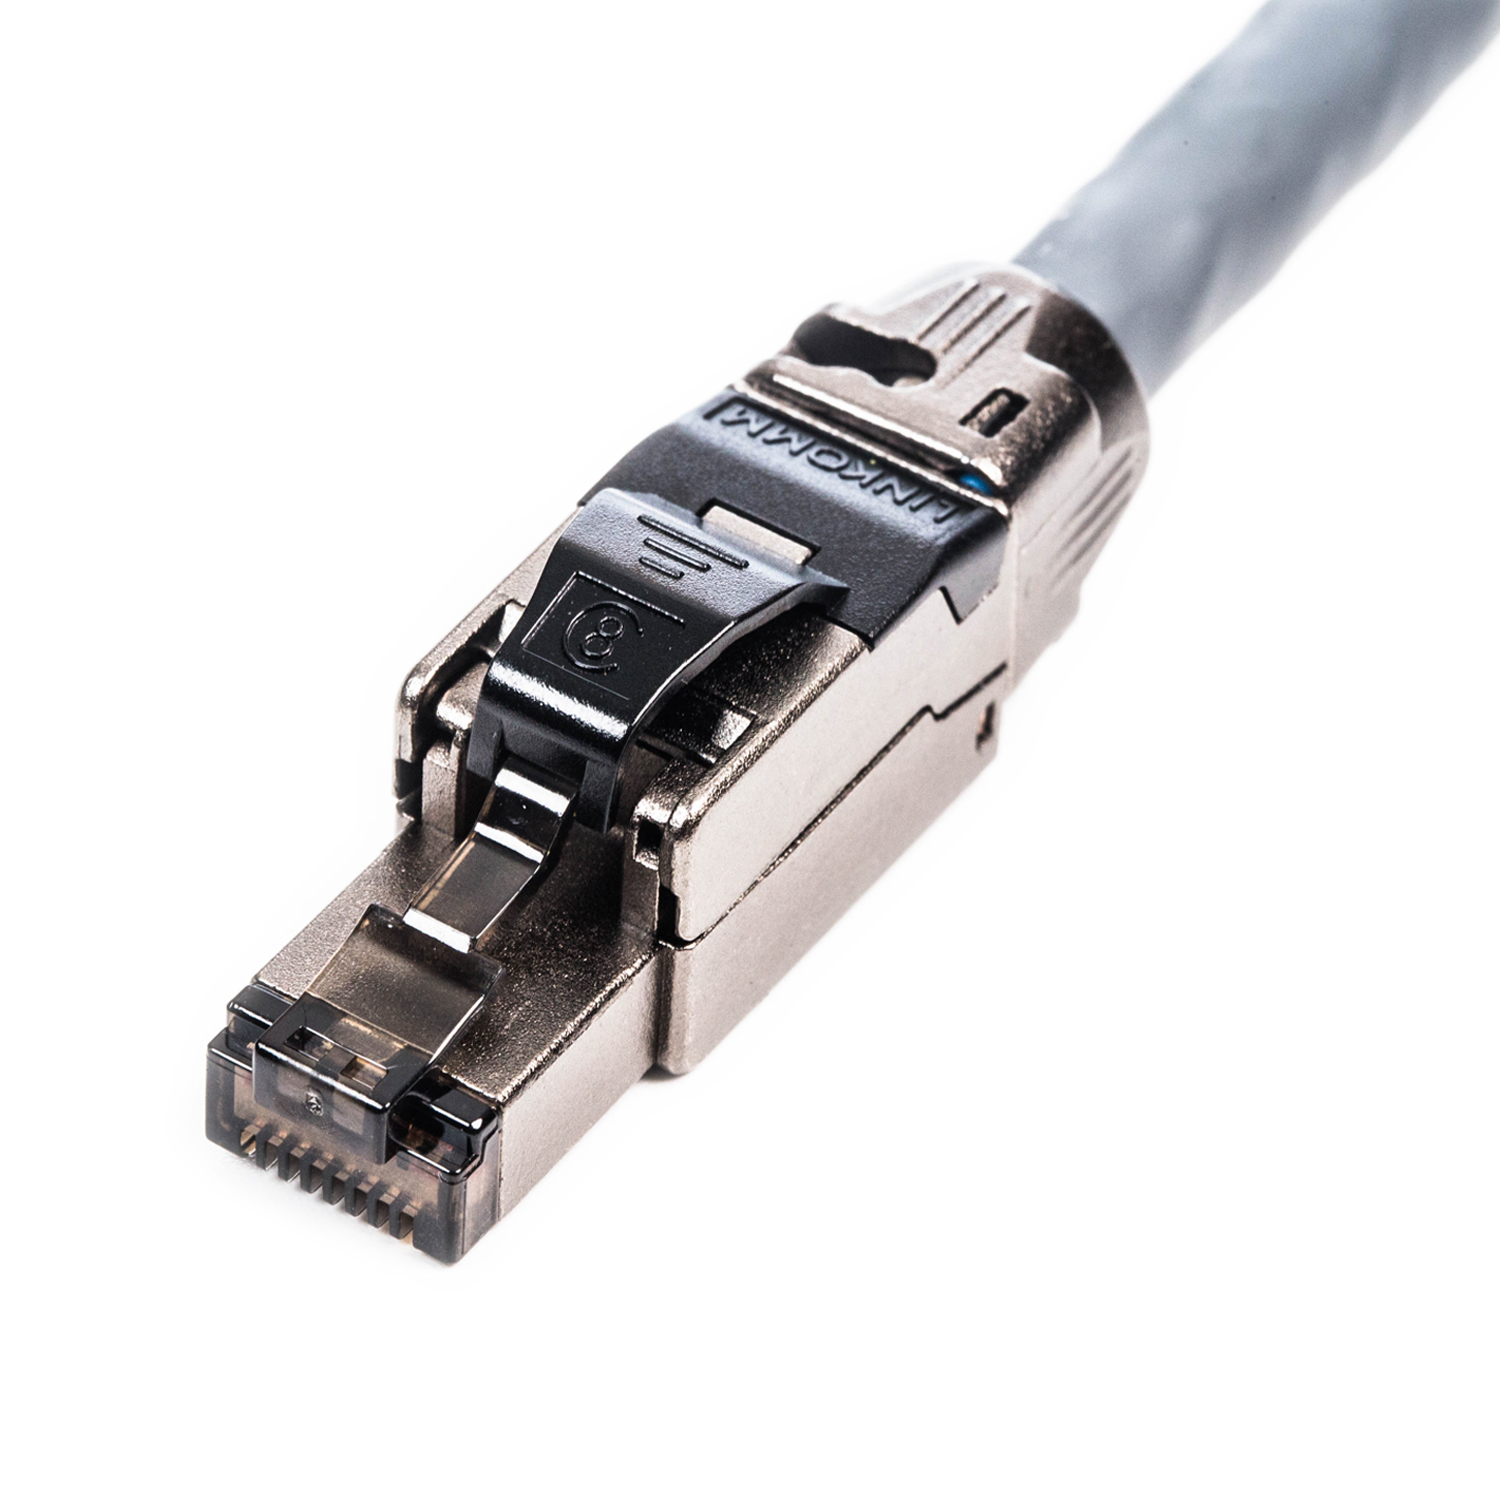 Cat.8 S/FTP 26 AWG Stranded Patch Cord, Advanced Modular Plug Solutions  for Critical Network Applications